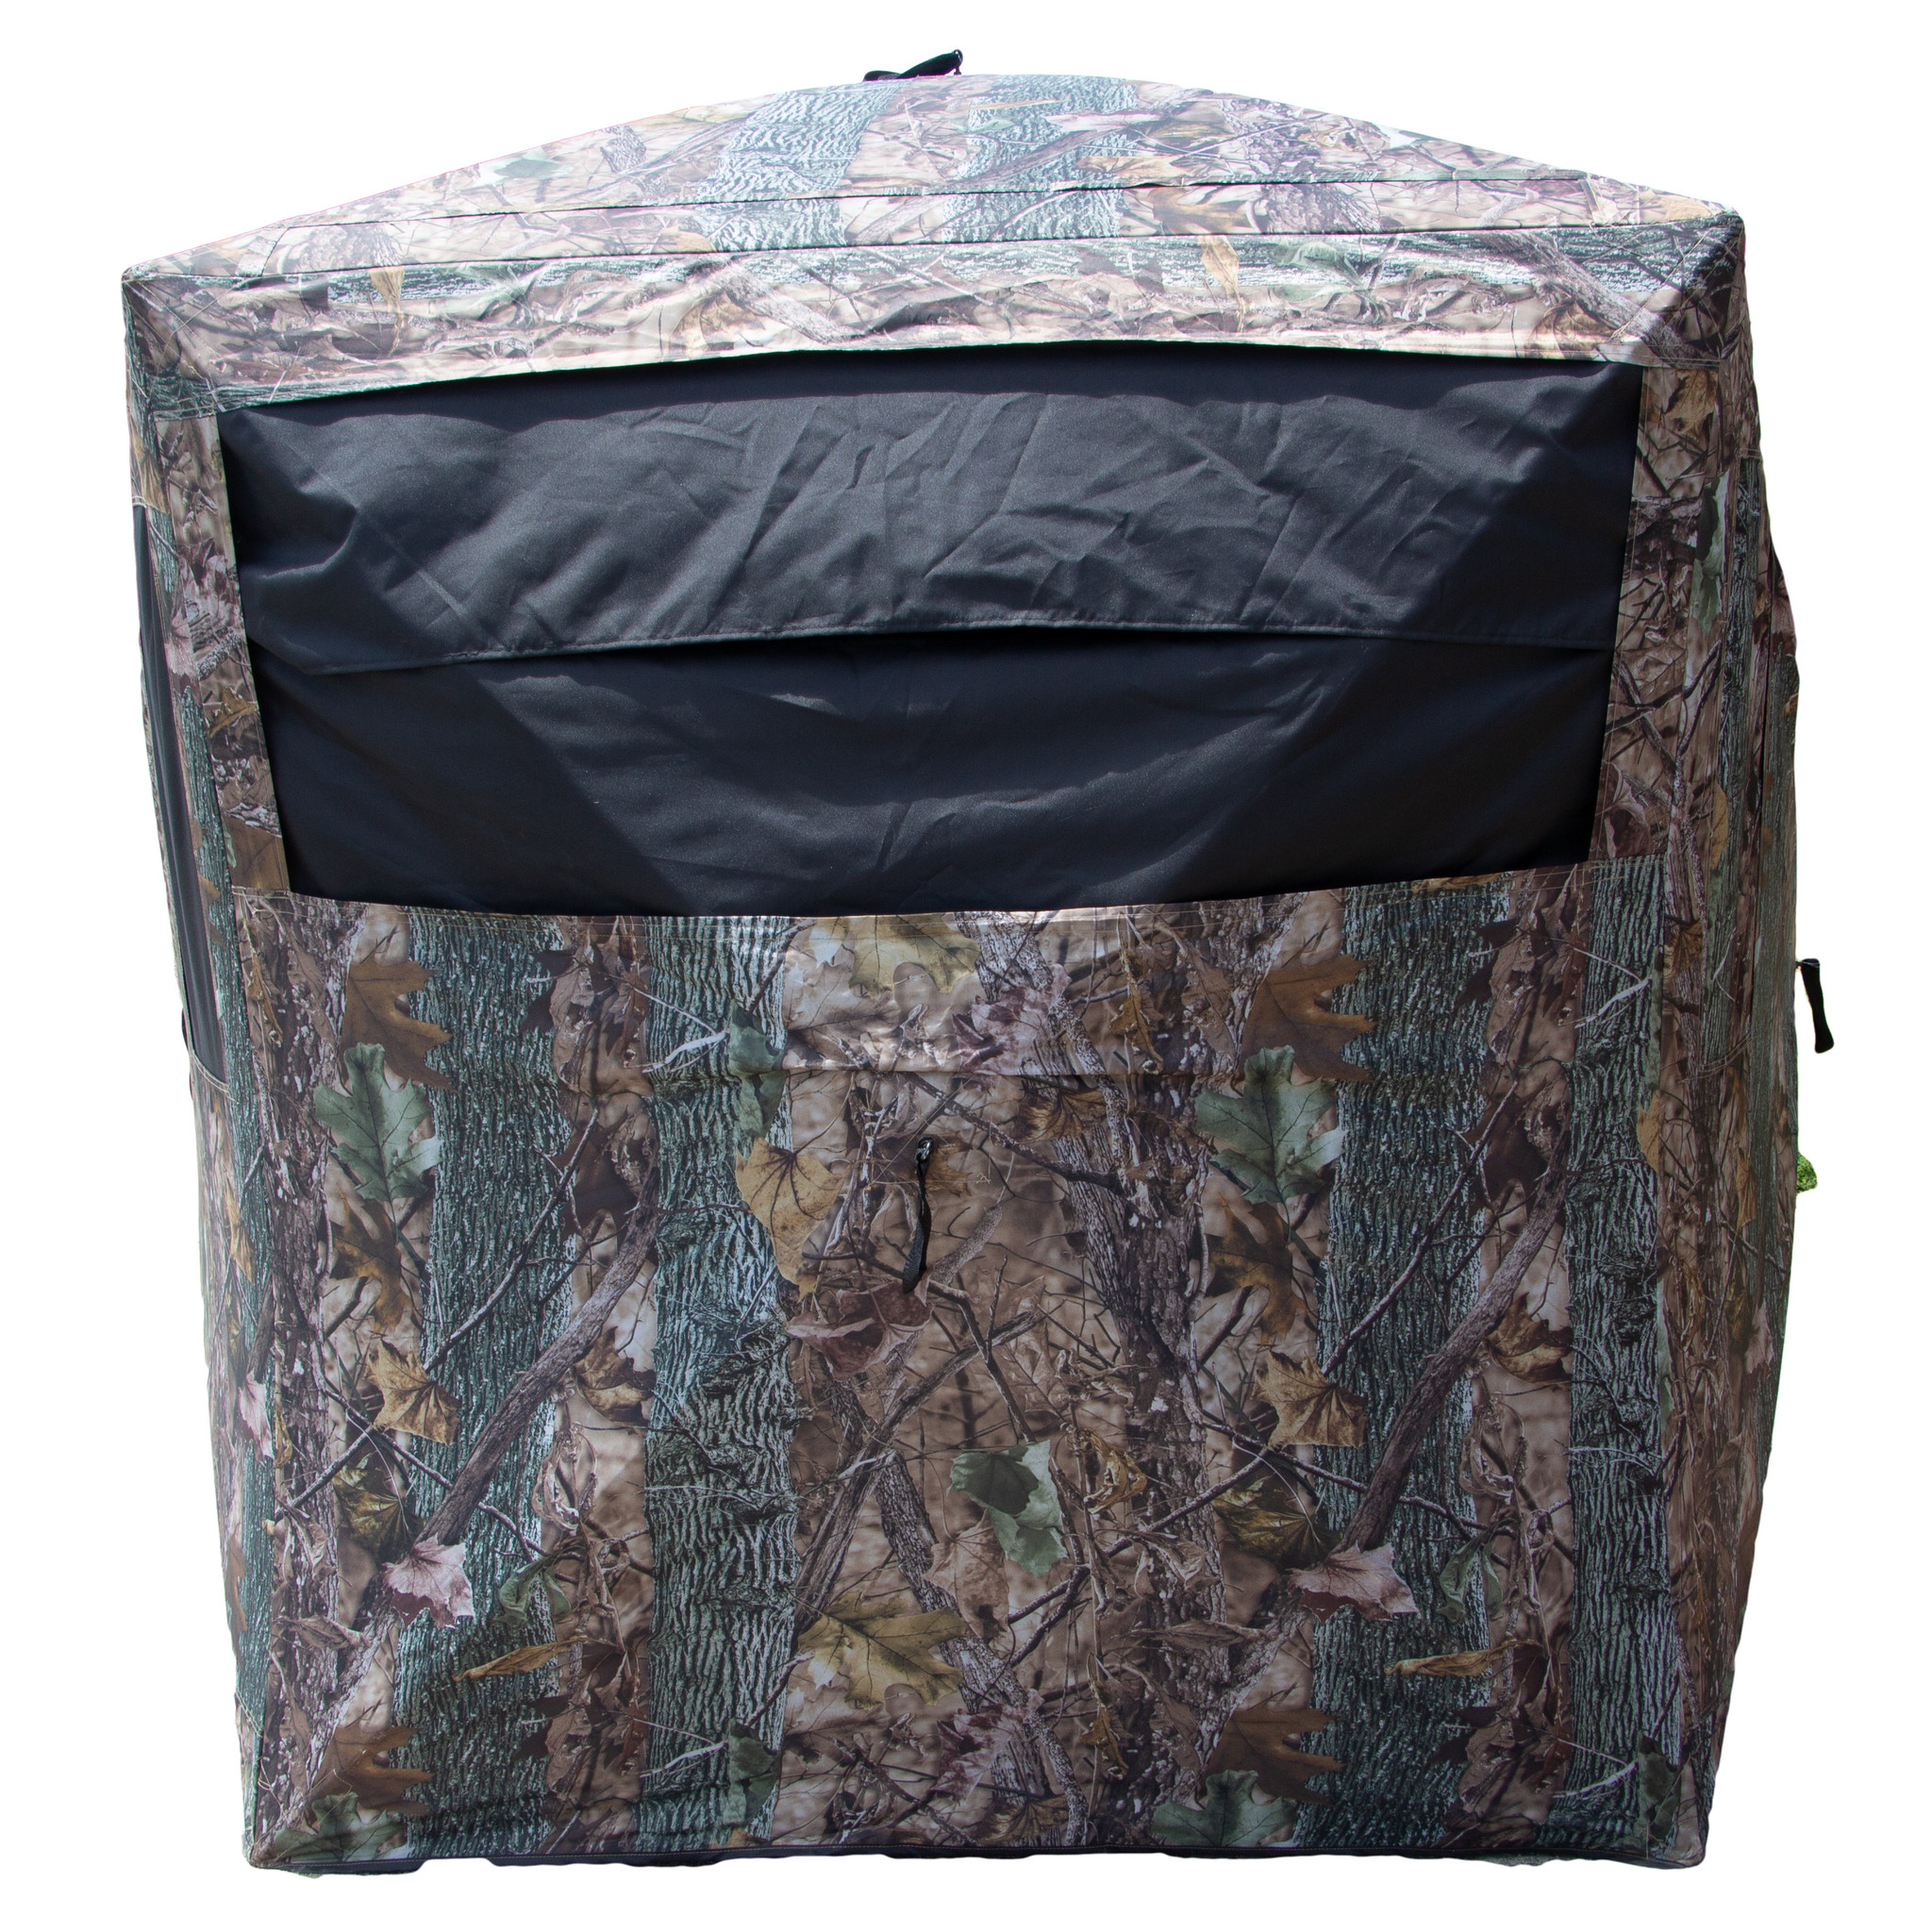 Rack Stacker The Stronghold Ground Blind by Rack Stacker